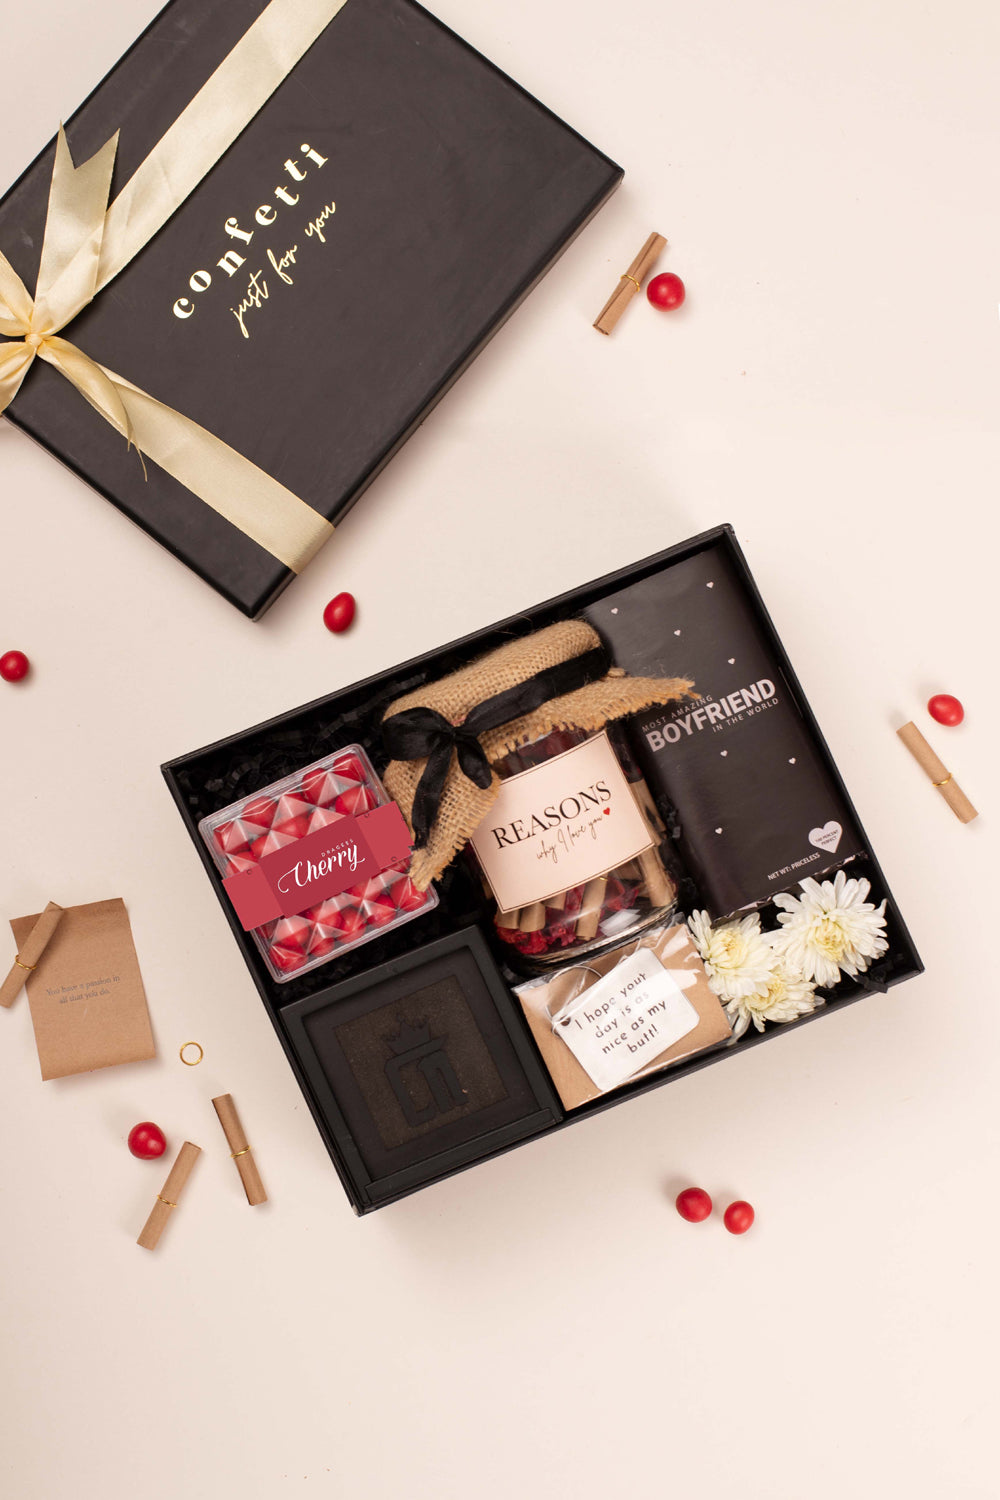 Gift Hampers For Boyfriend - Surprise Gifts For BF